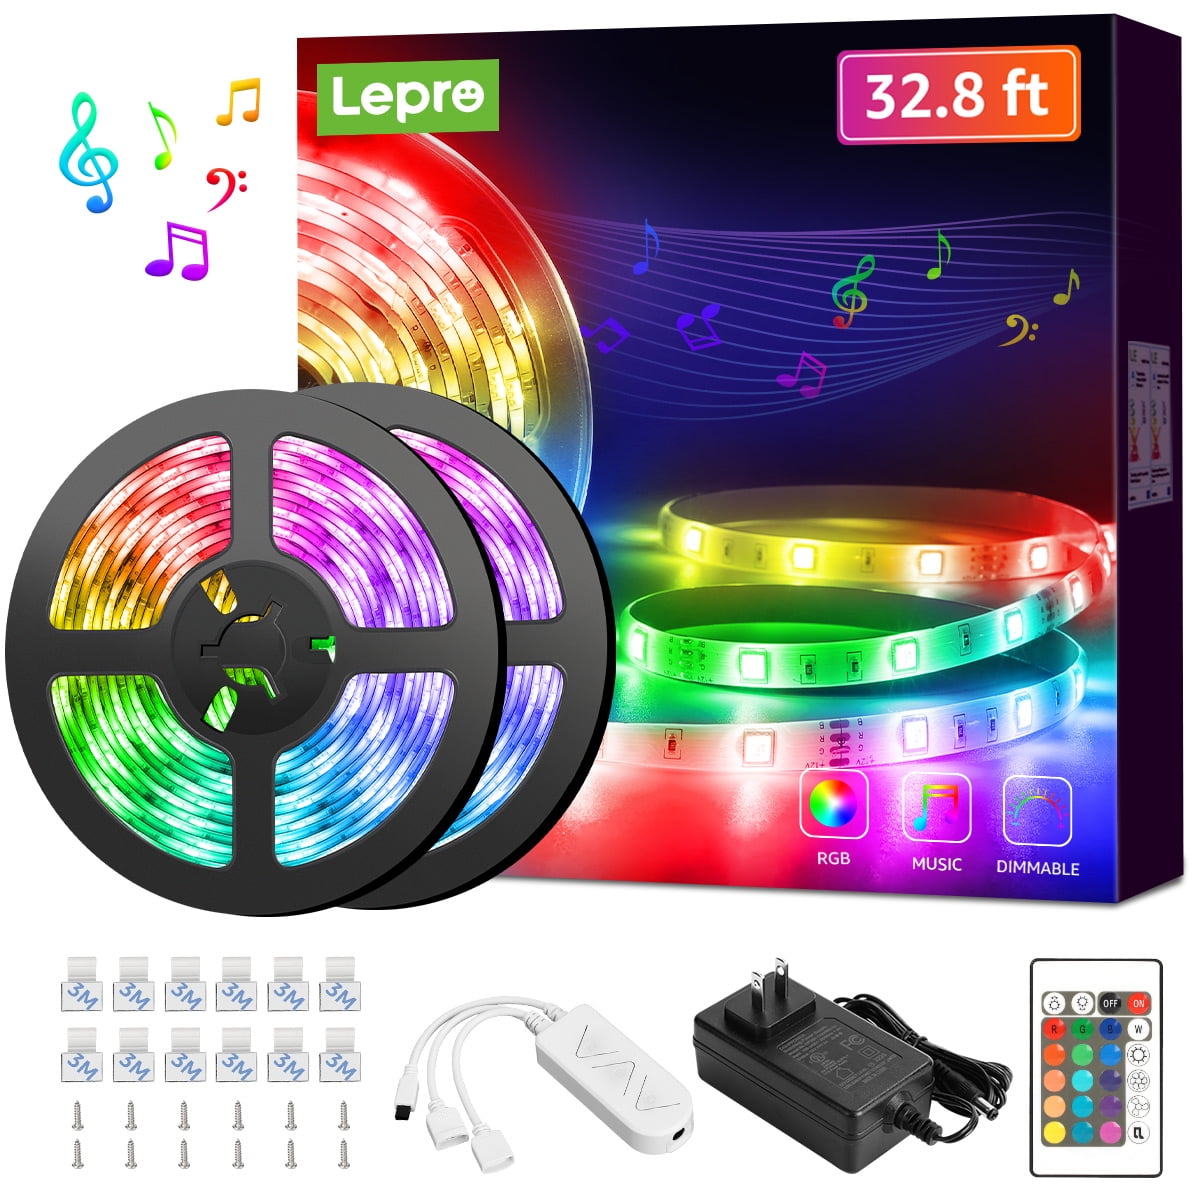 Lepro LED Strip Music Sync Light Strip with Remote, Valentines Gifts for Men & Women, 5050 RGB Lights for Bedroom, Home, Gaming Room, Party, Wall,Valentines Day Decor -